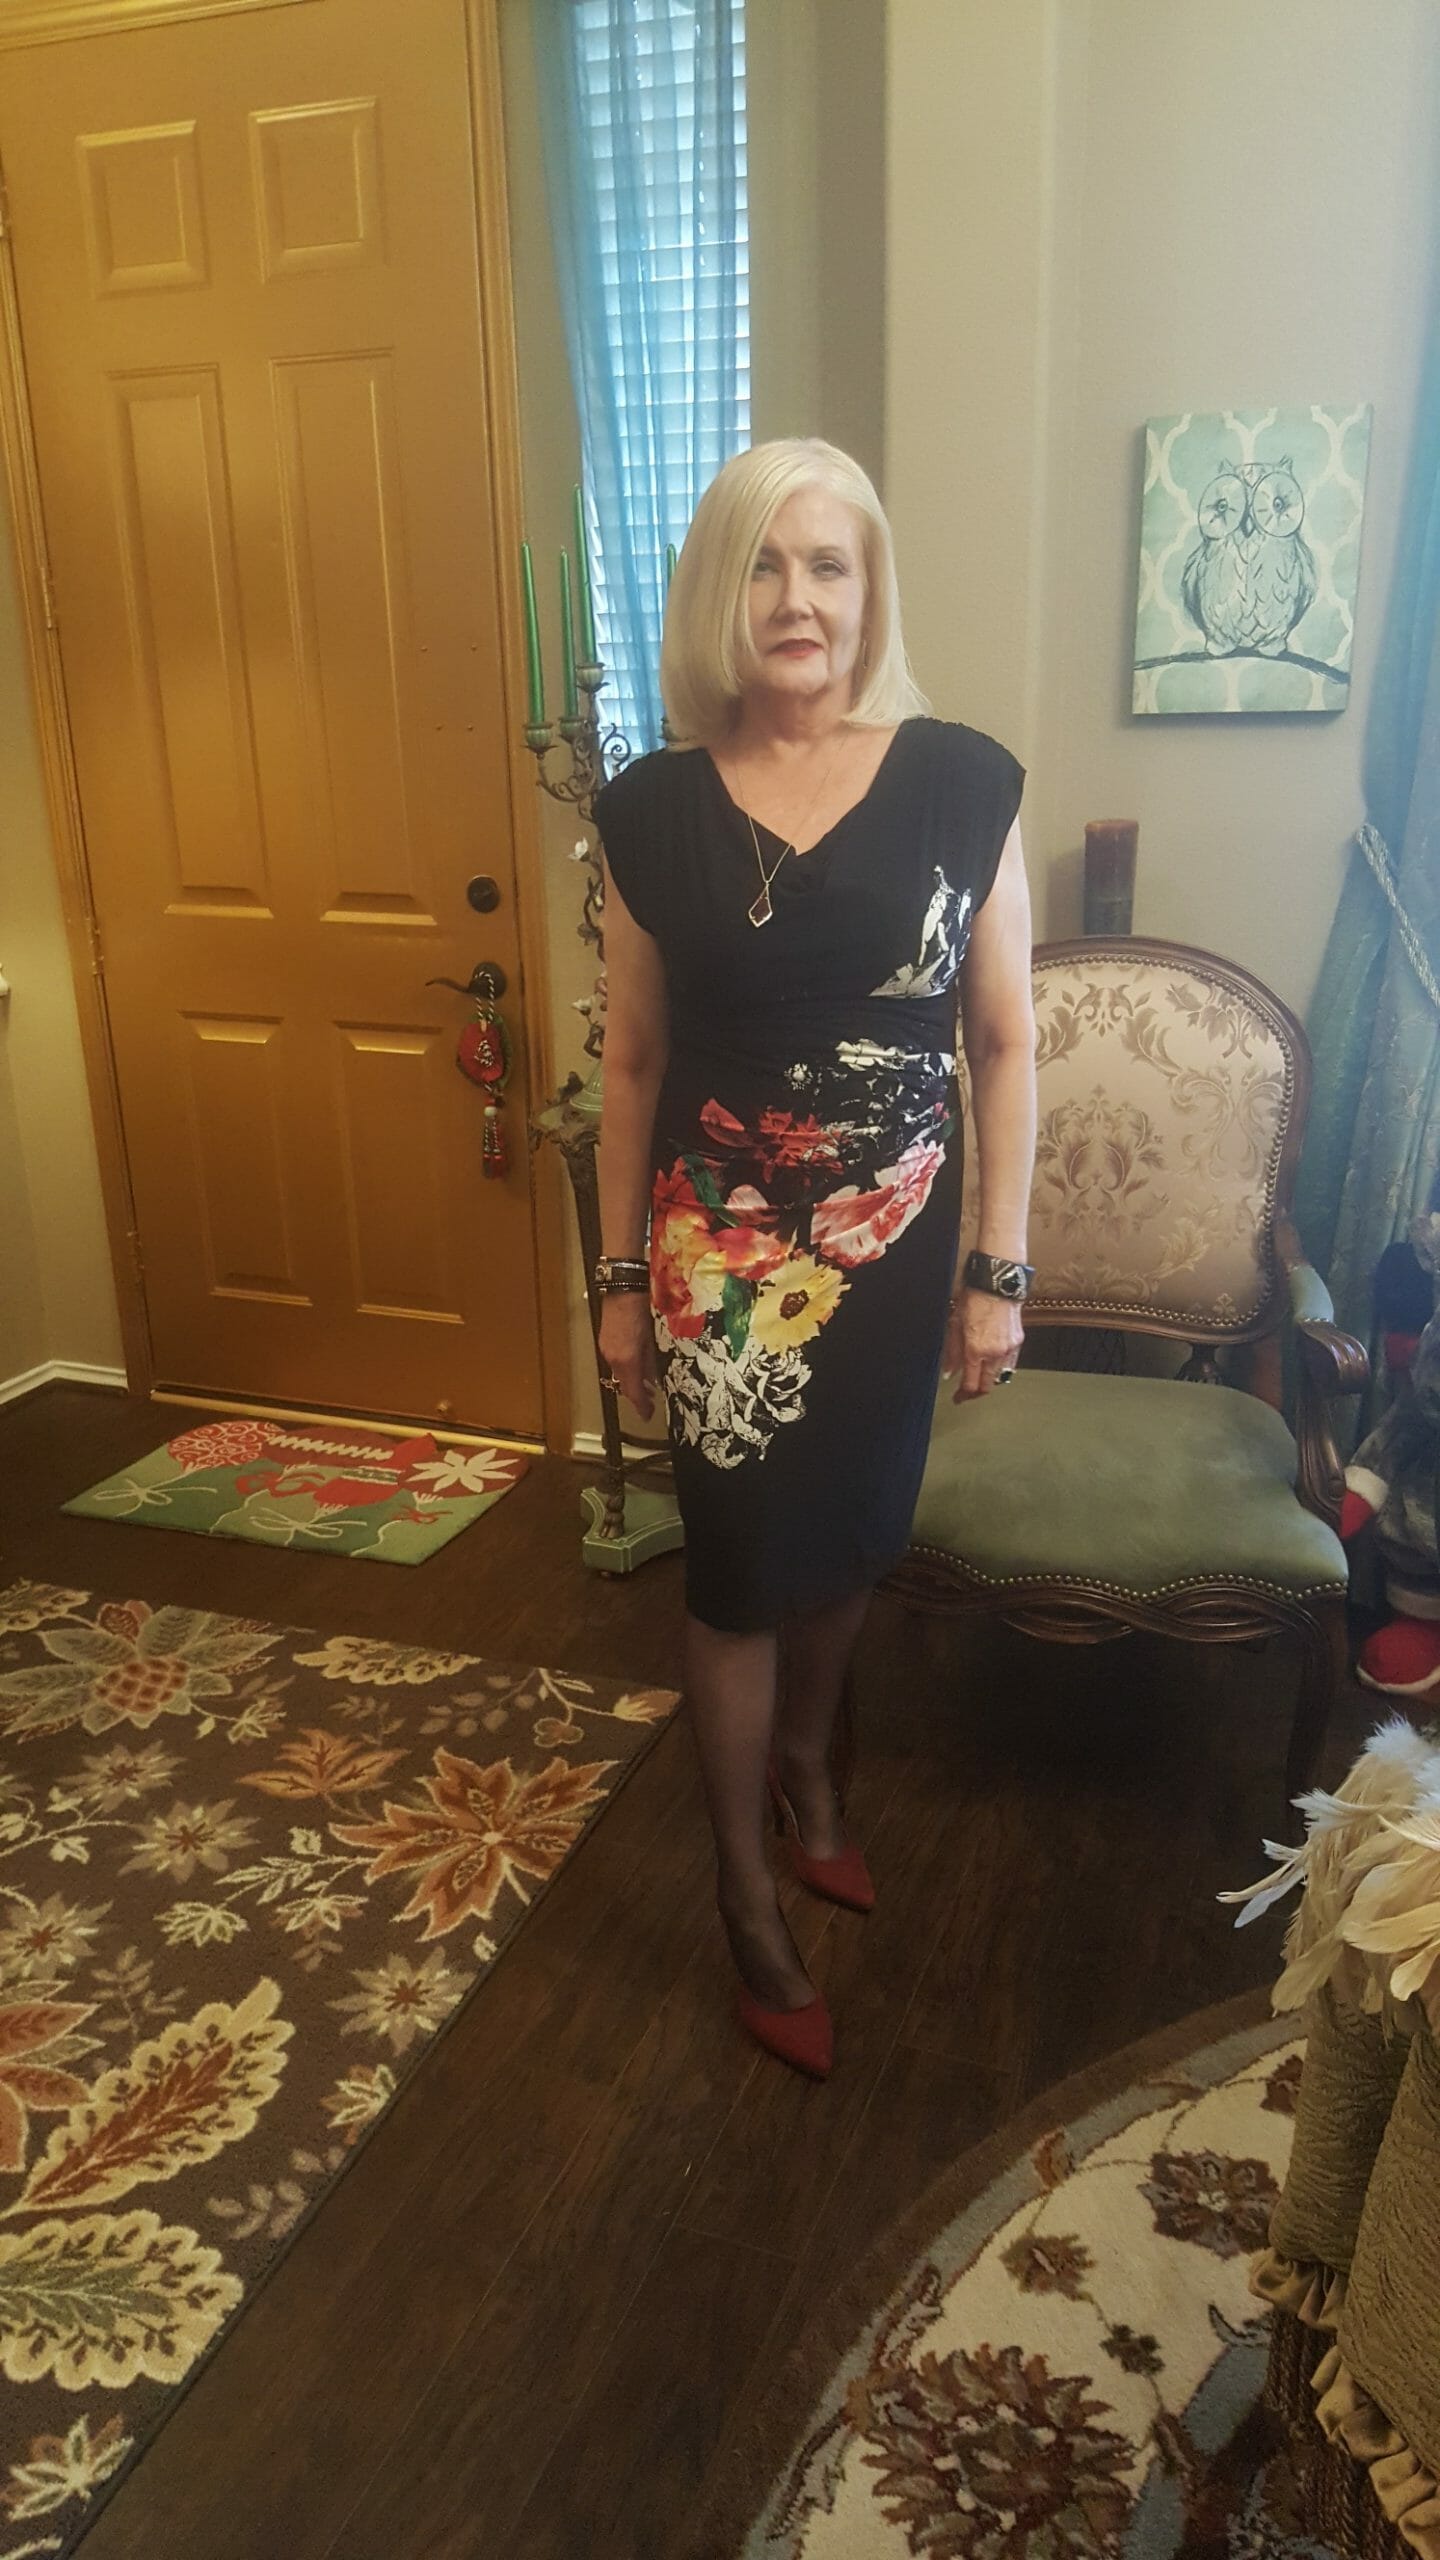 A Midnight Velvet customer in her foyer, in a black V-neck dress with a diagonal splash of white, red and yellow flowers.